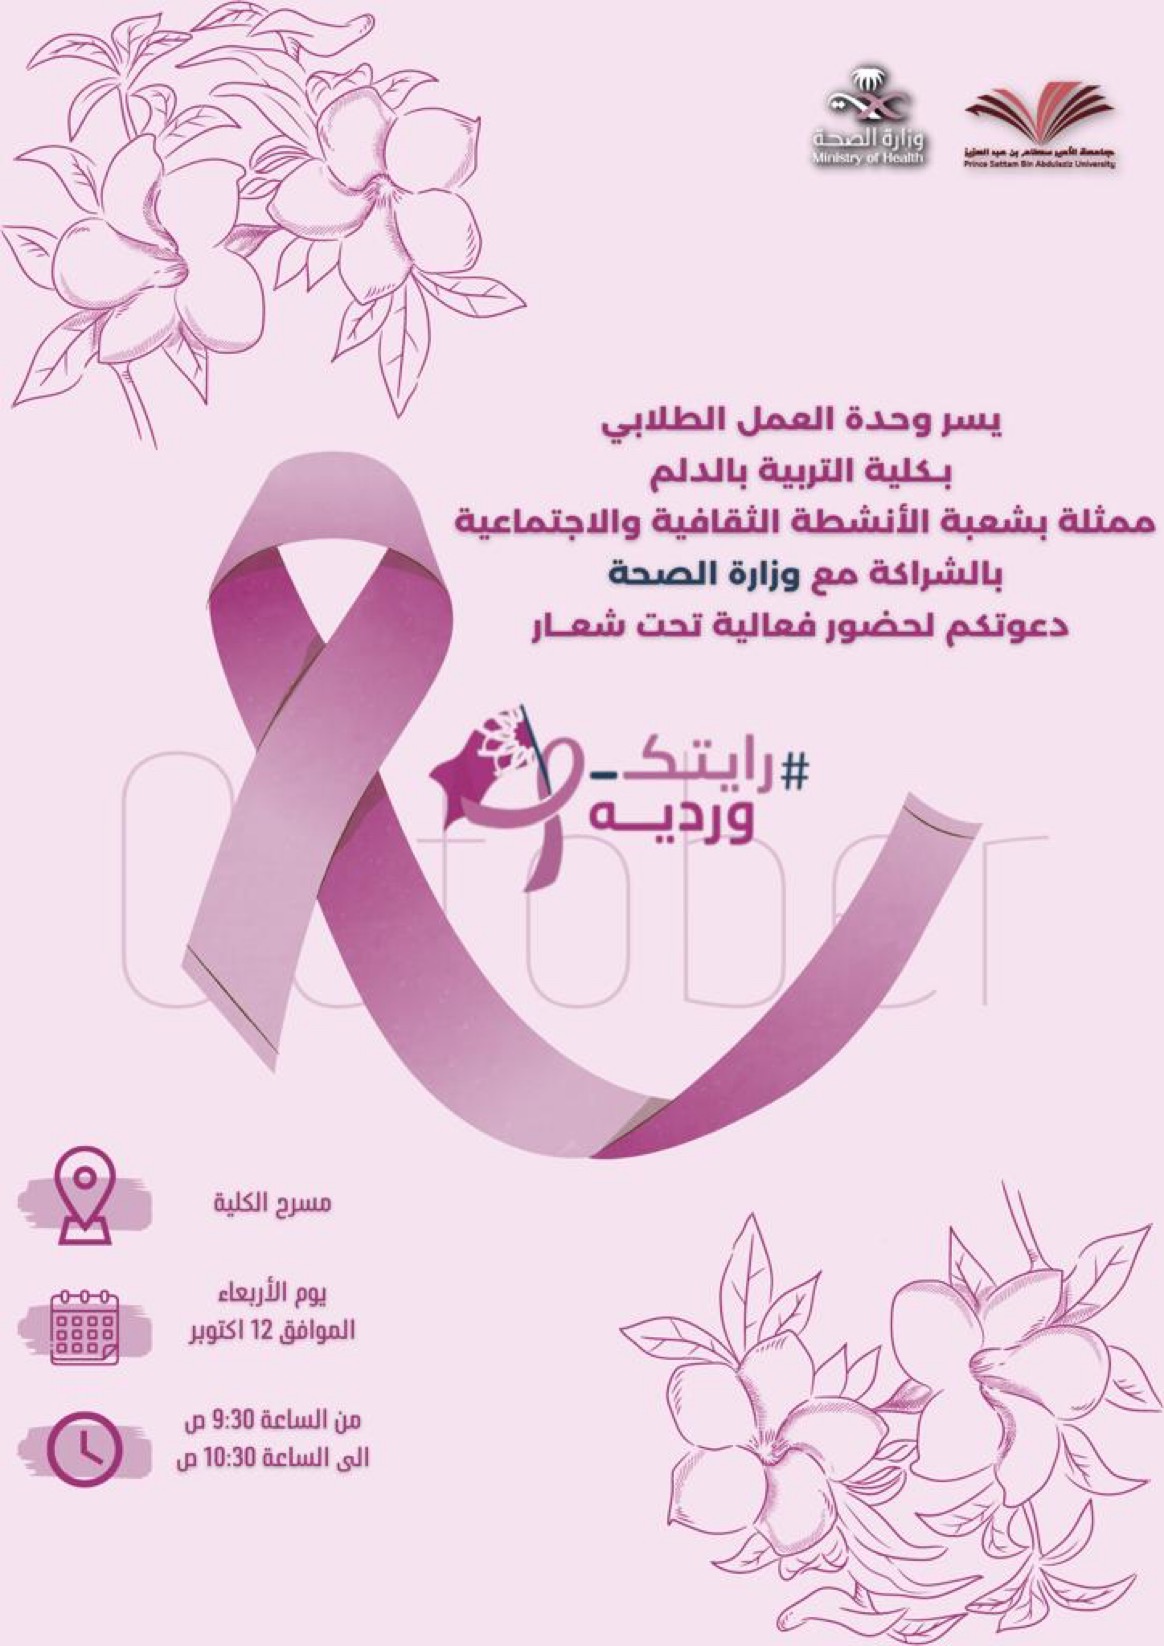 On the occasion of Breast Cancer Awareness Month (October) an event at the College Theater under the slogan: #رايتك_ورديه